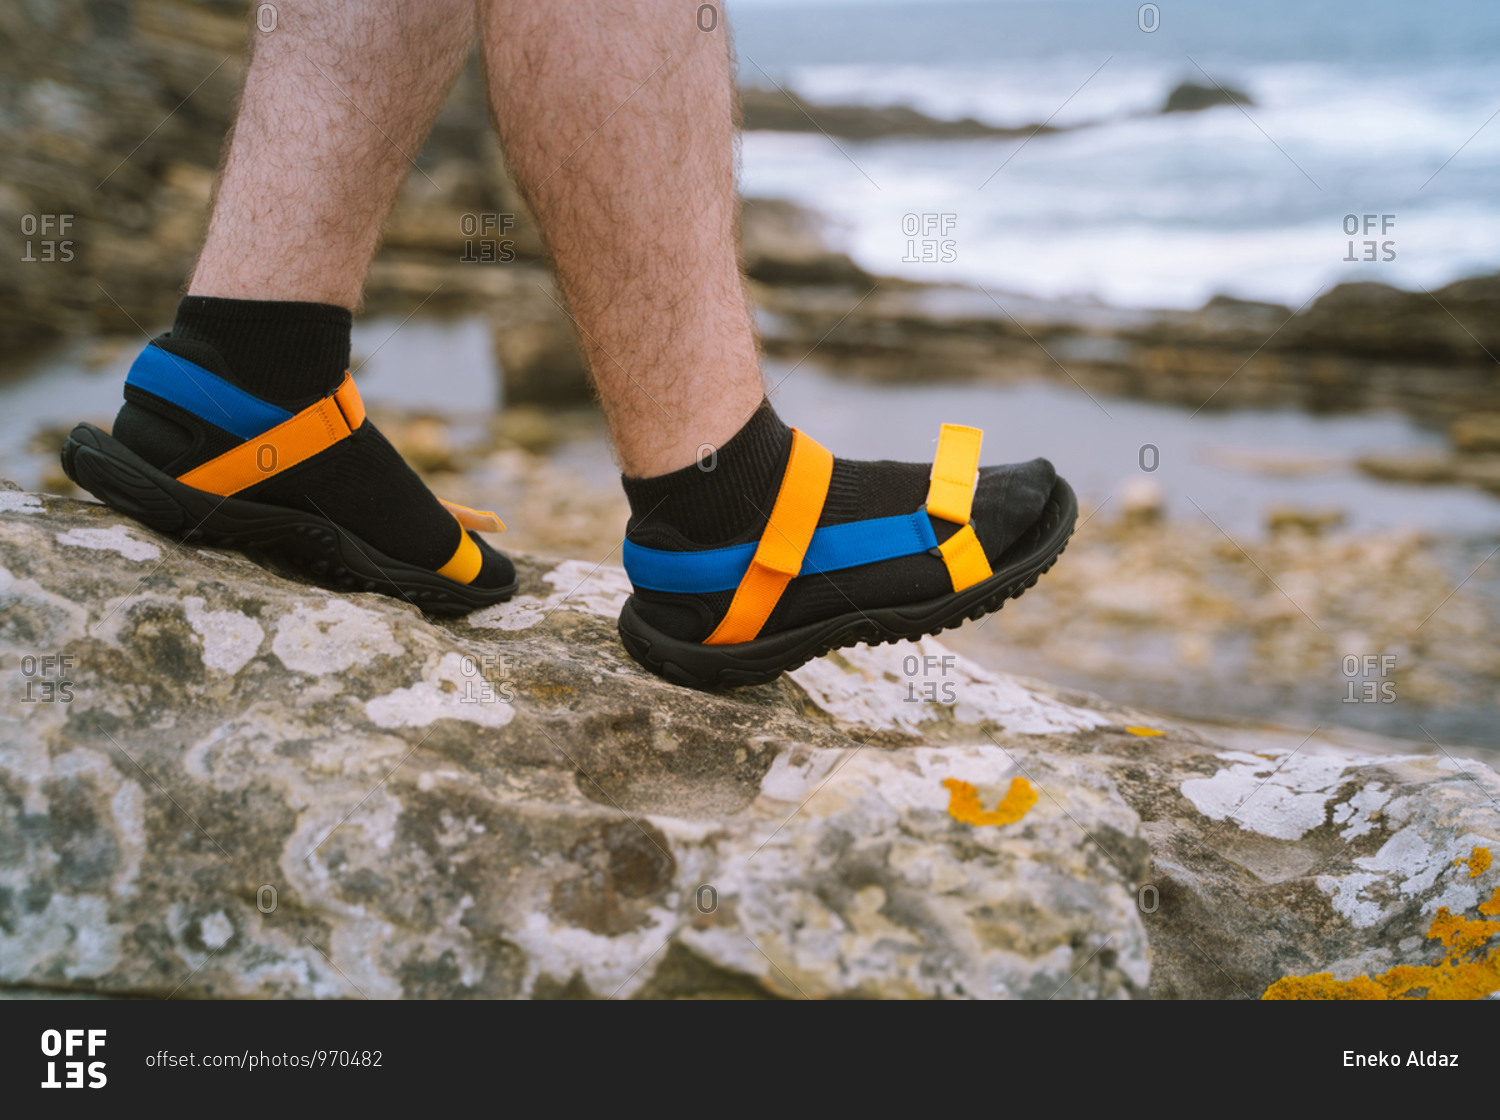 Hairy legs wearing colorful sandals with black socks